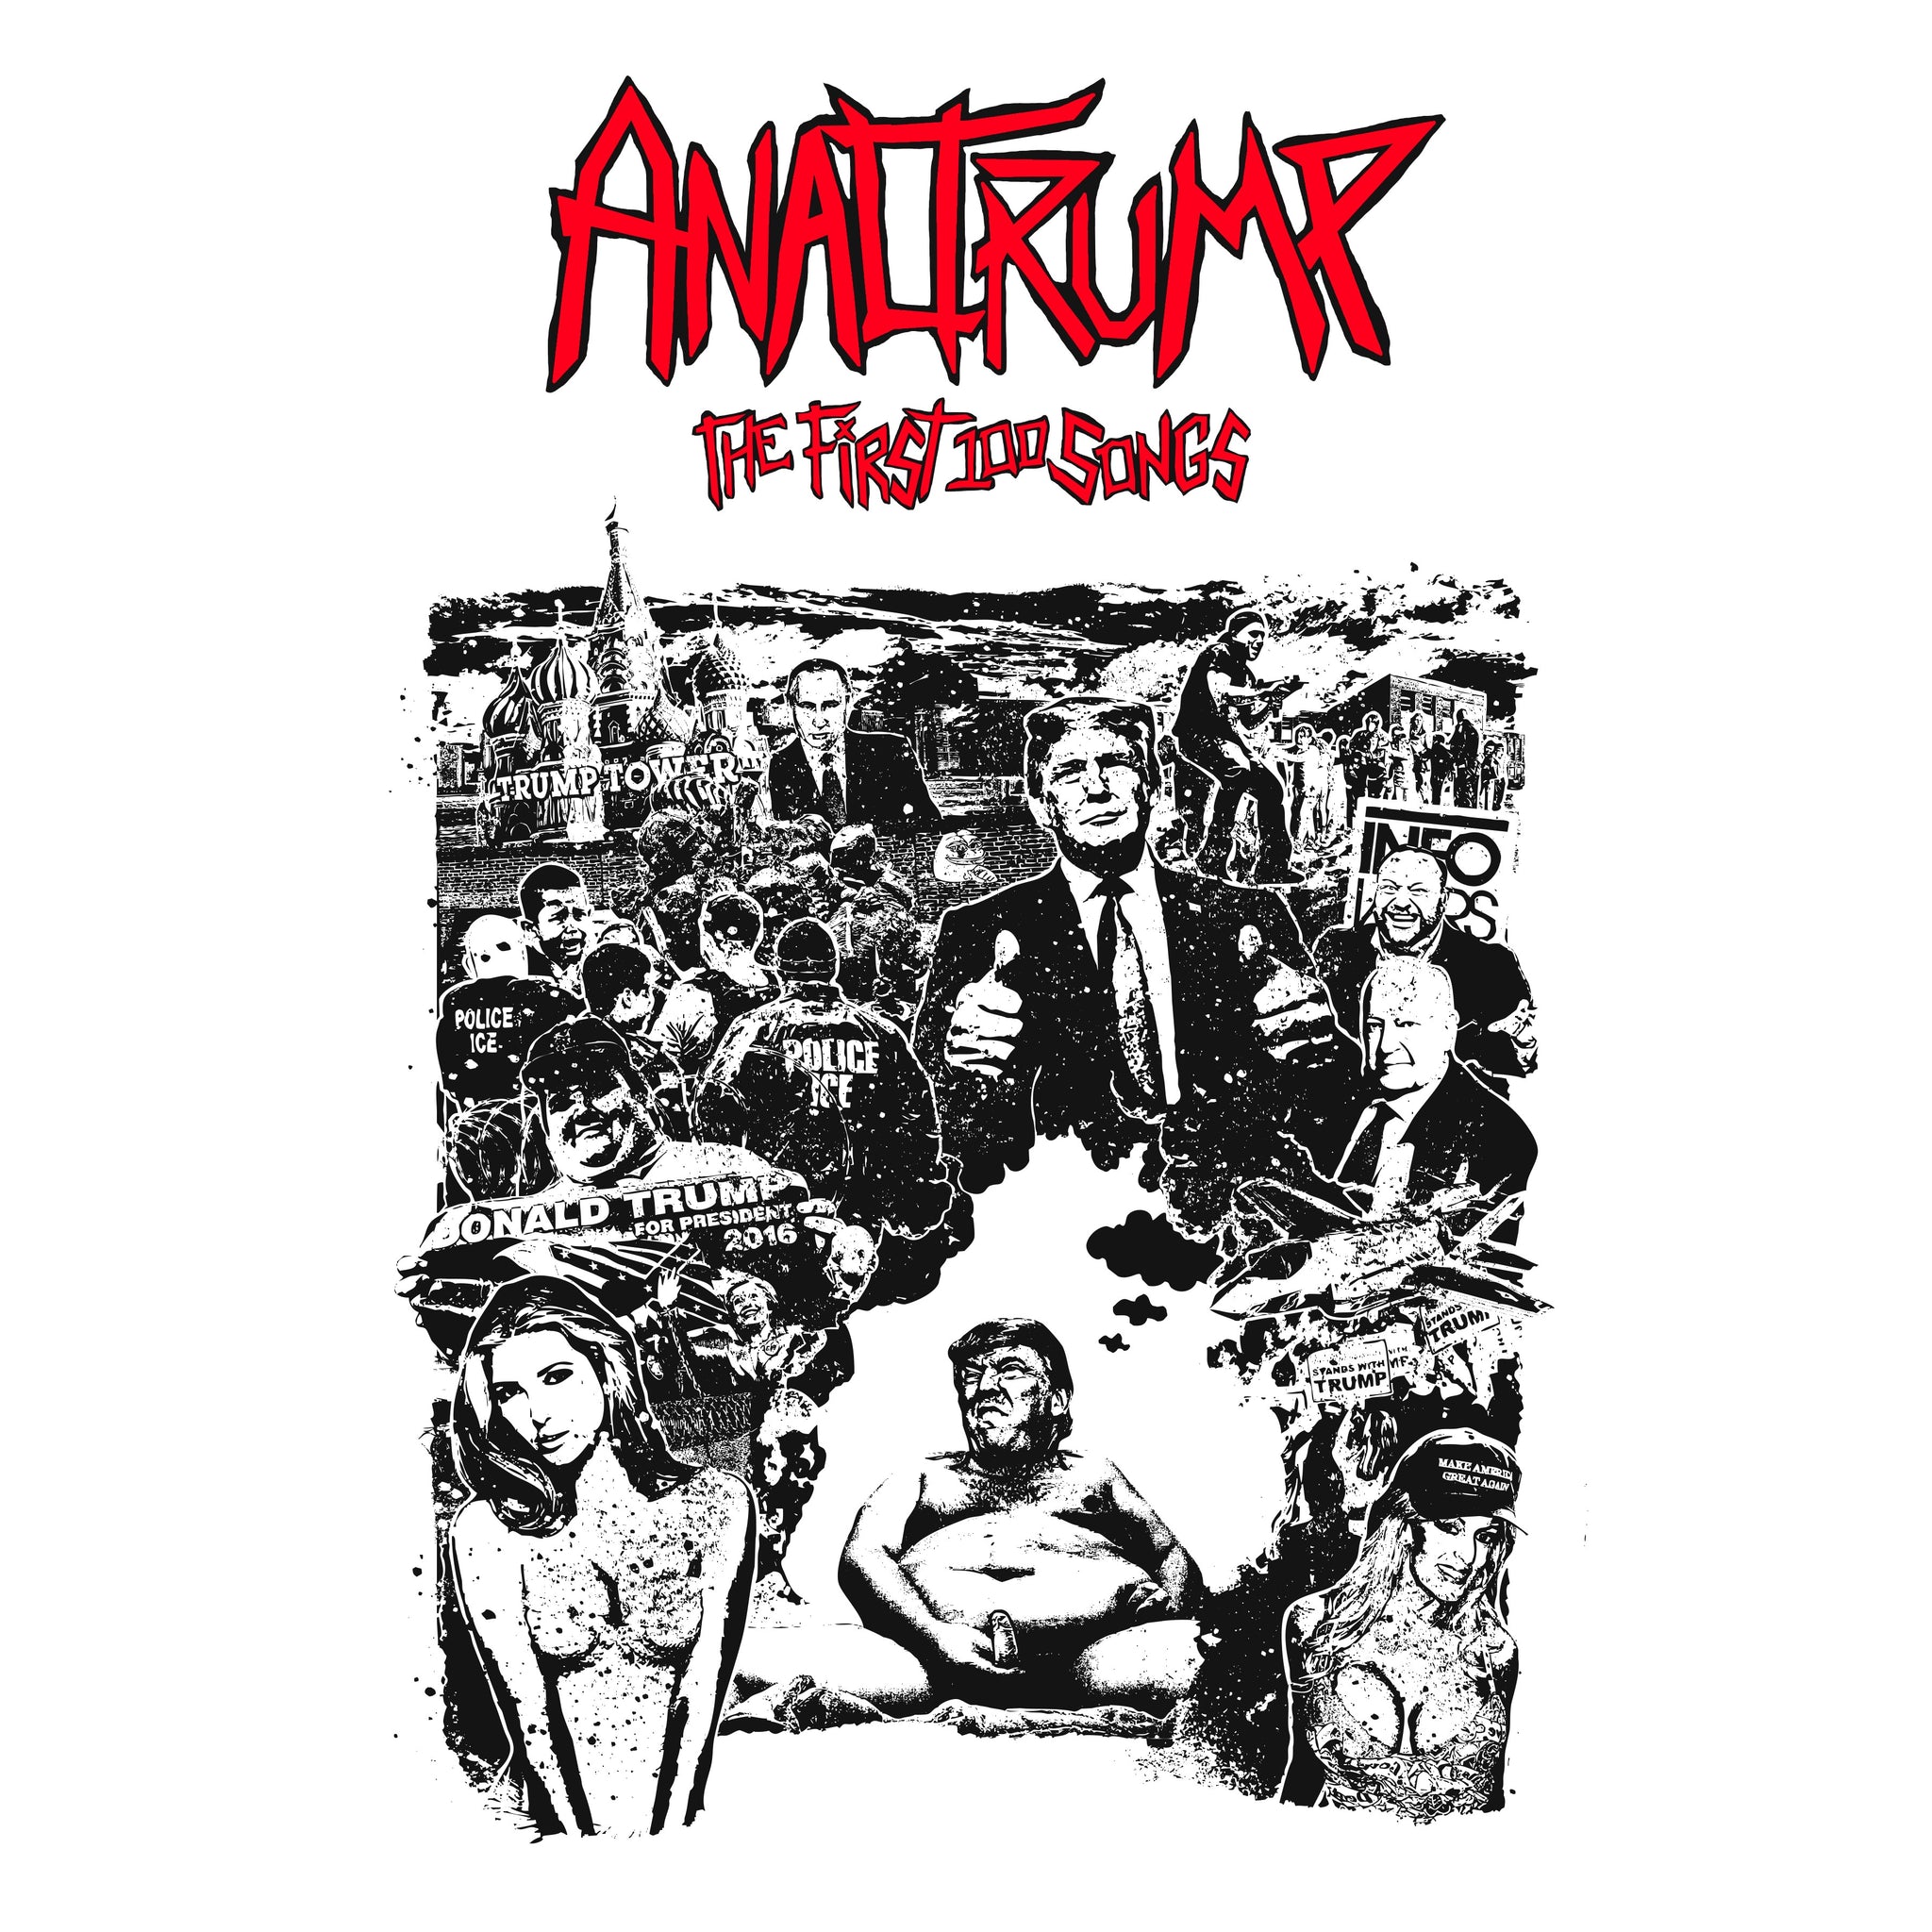 Anal Trump - The First 100 Songs - New Vinyl 2018 Joyful Noise Lp on Screen Printed 'Drain The Swamp Green' Colored Vinyl with Download - Grindcore / Metal